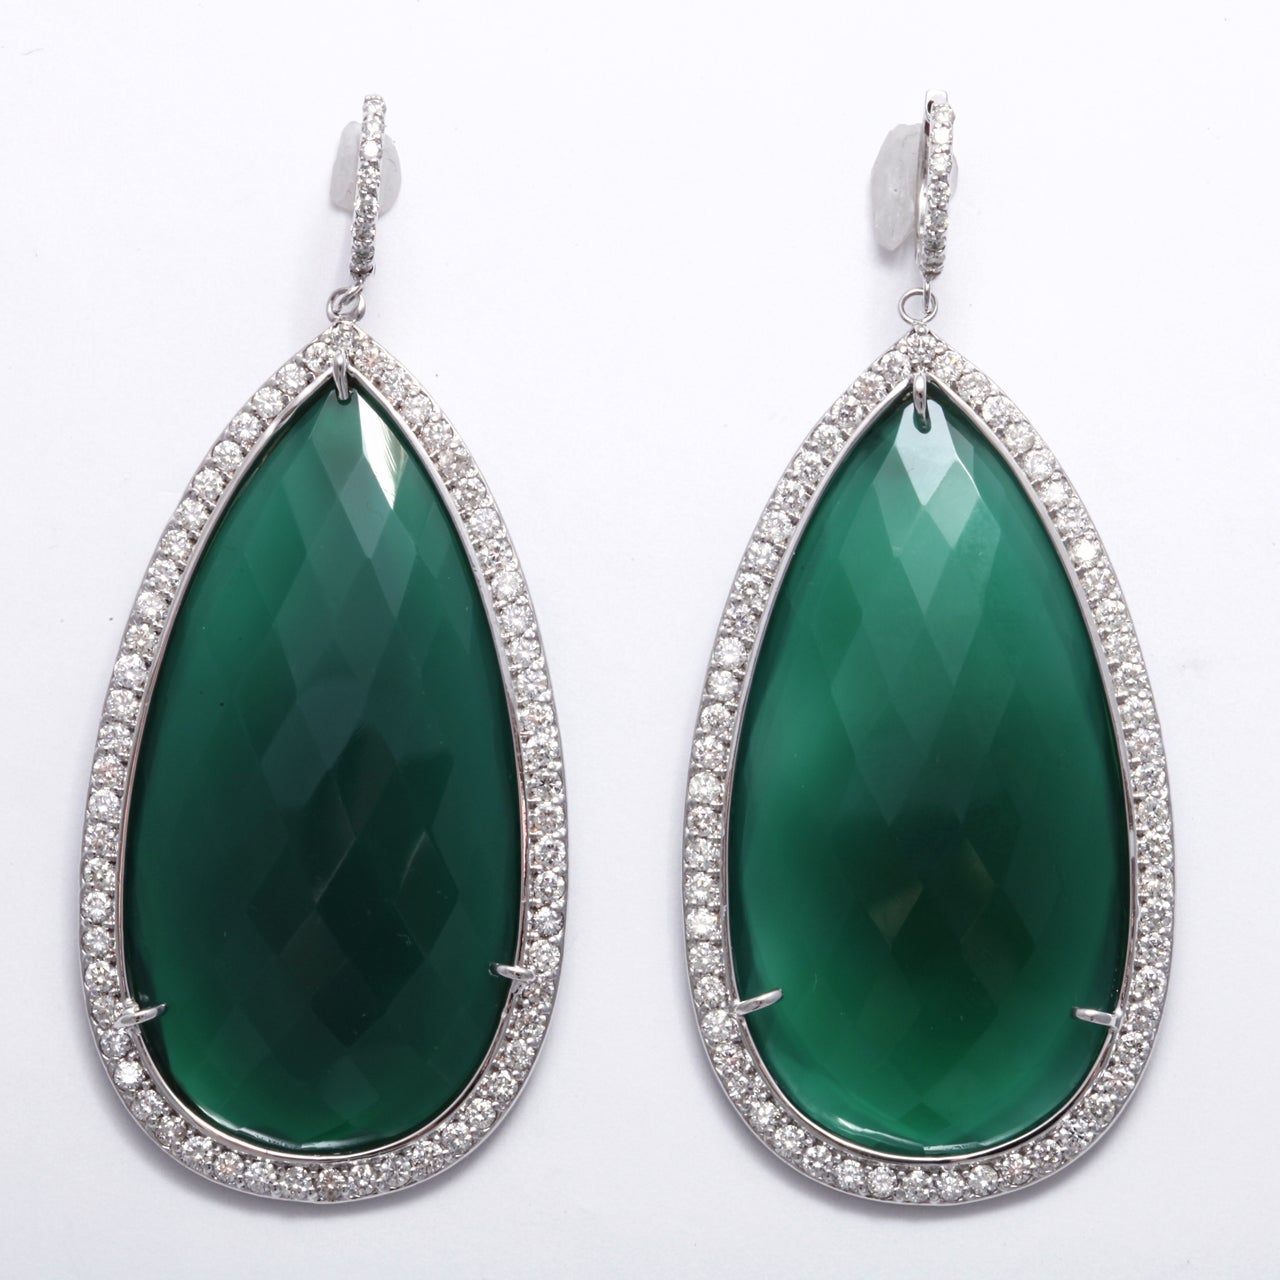 Vibrant green agate earrings flanked with numerous diamonds weighing 4.17 carats, in 14k white gold. Can custom make them any size, color or metal.